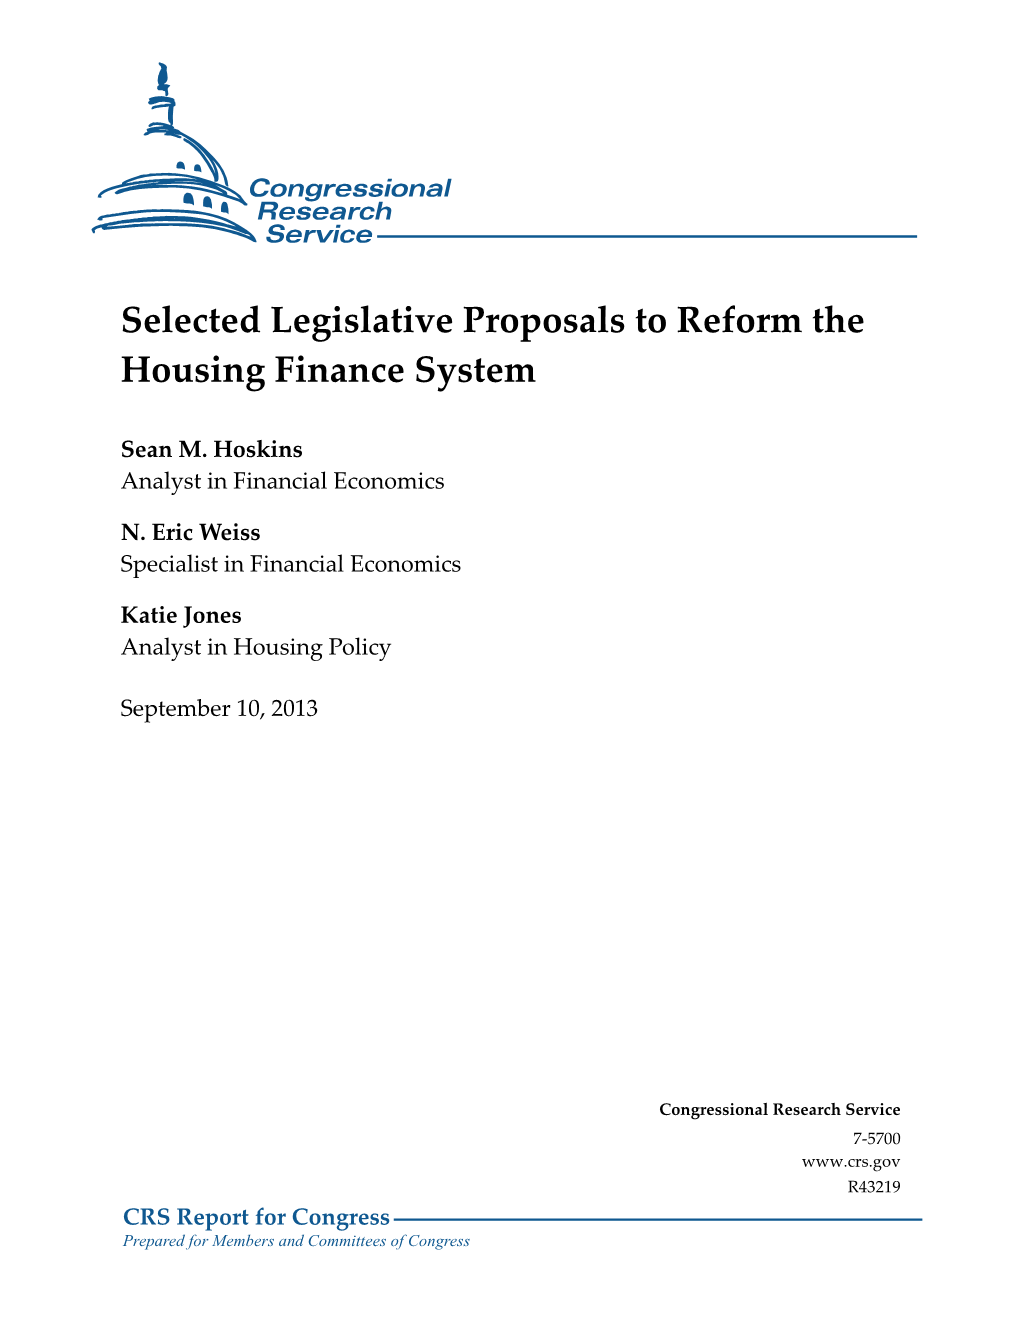 Selected Legislative Proposals to Reform the Housing Finance System